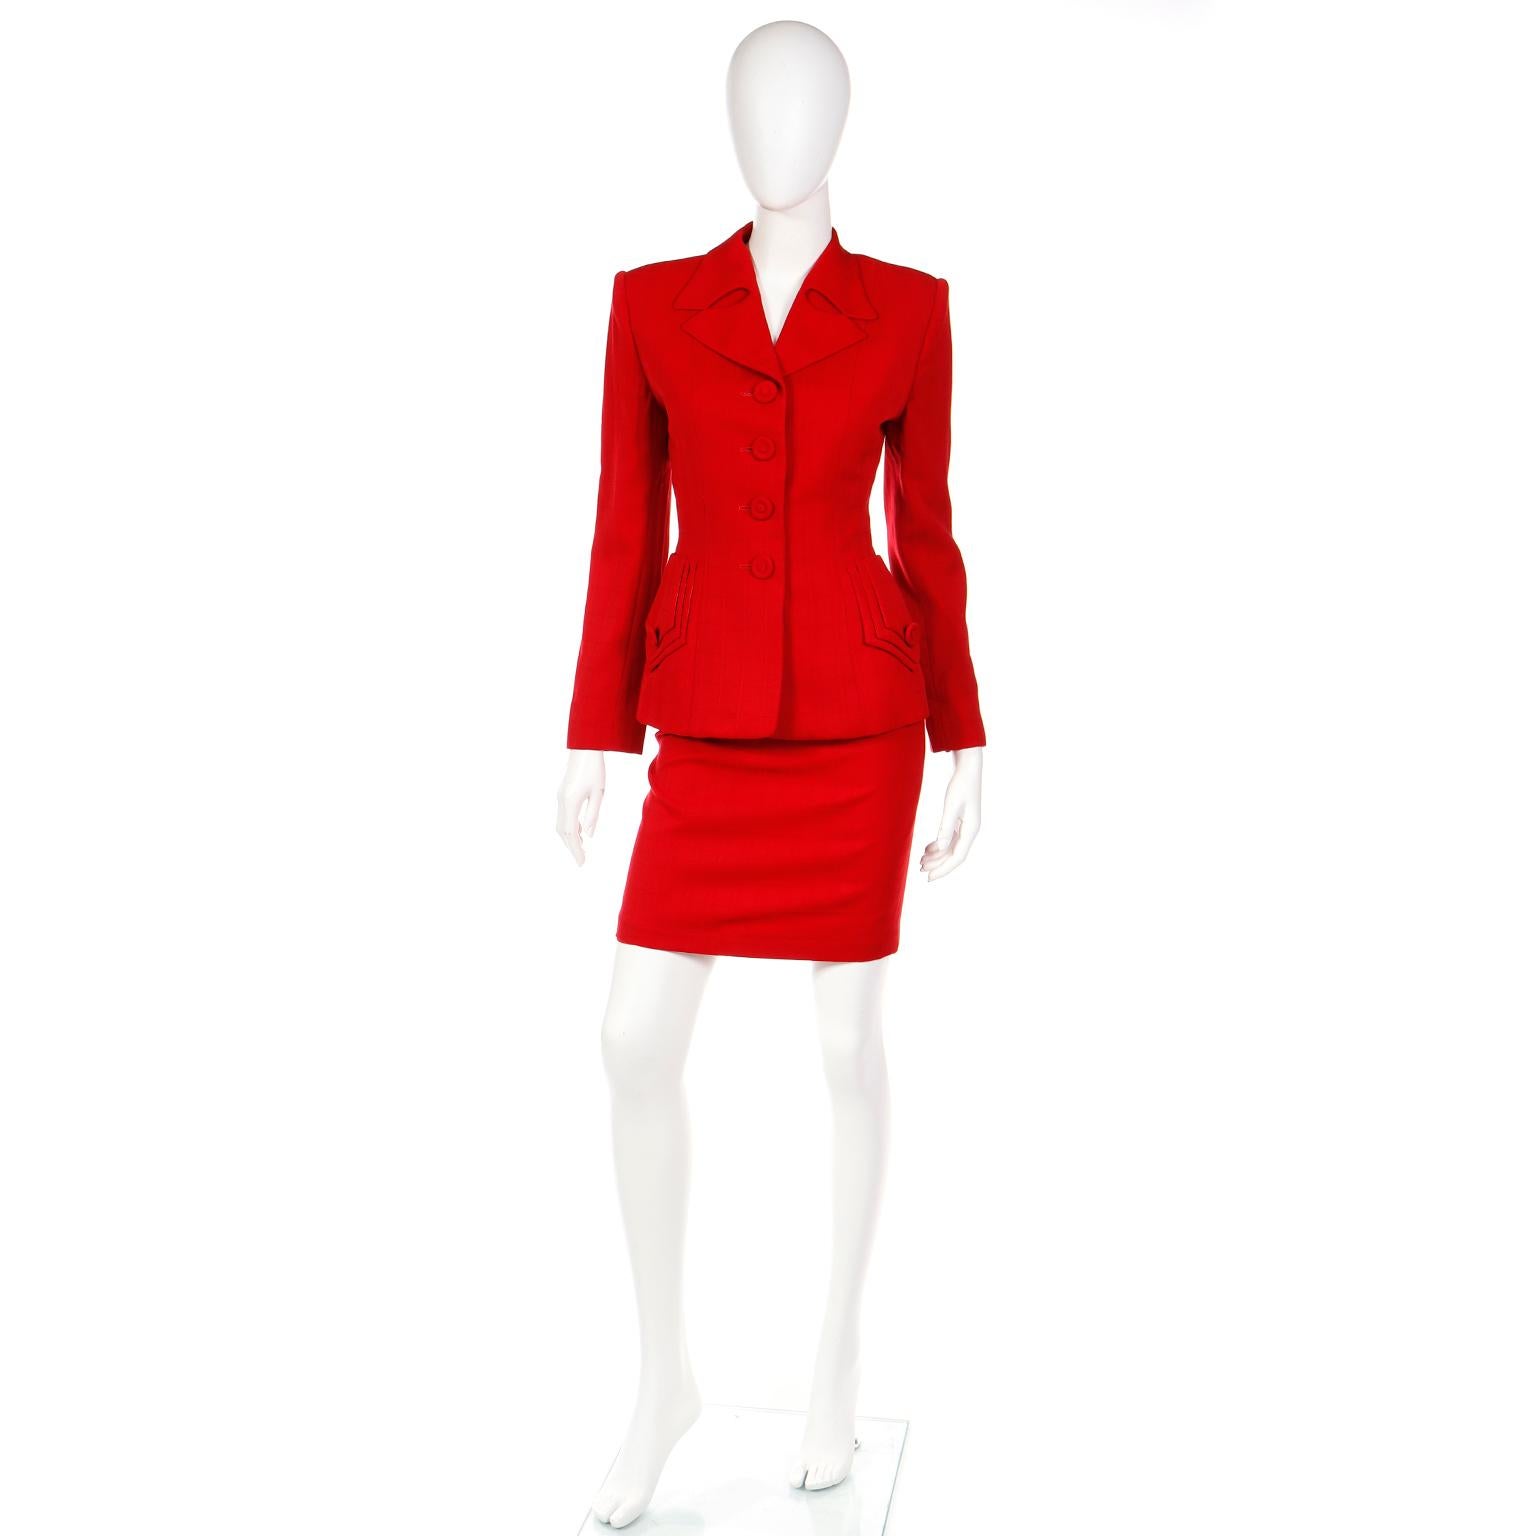 This is such a fun avant garde skirt suit by Norma Kamali from 1988. It is a red wool skirt and jacket suit with tonal windowpane plaid grid pattern and cutouts in the lapels that look like flame licks. The beautiful fitted jacket is a 1940s style,